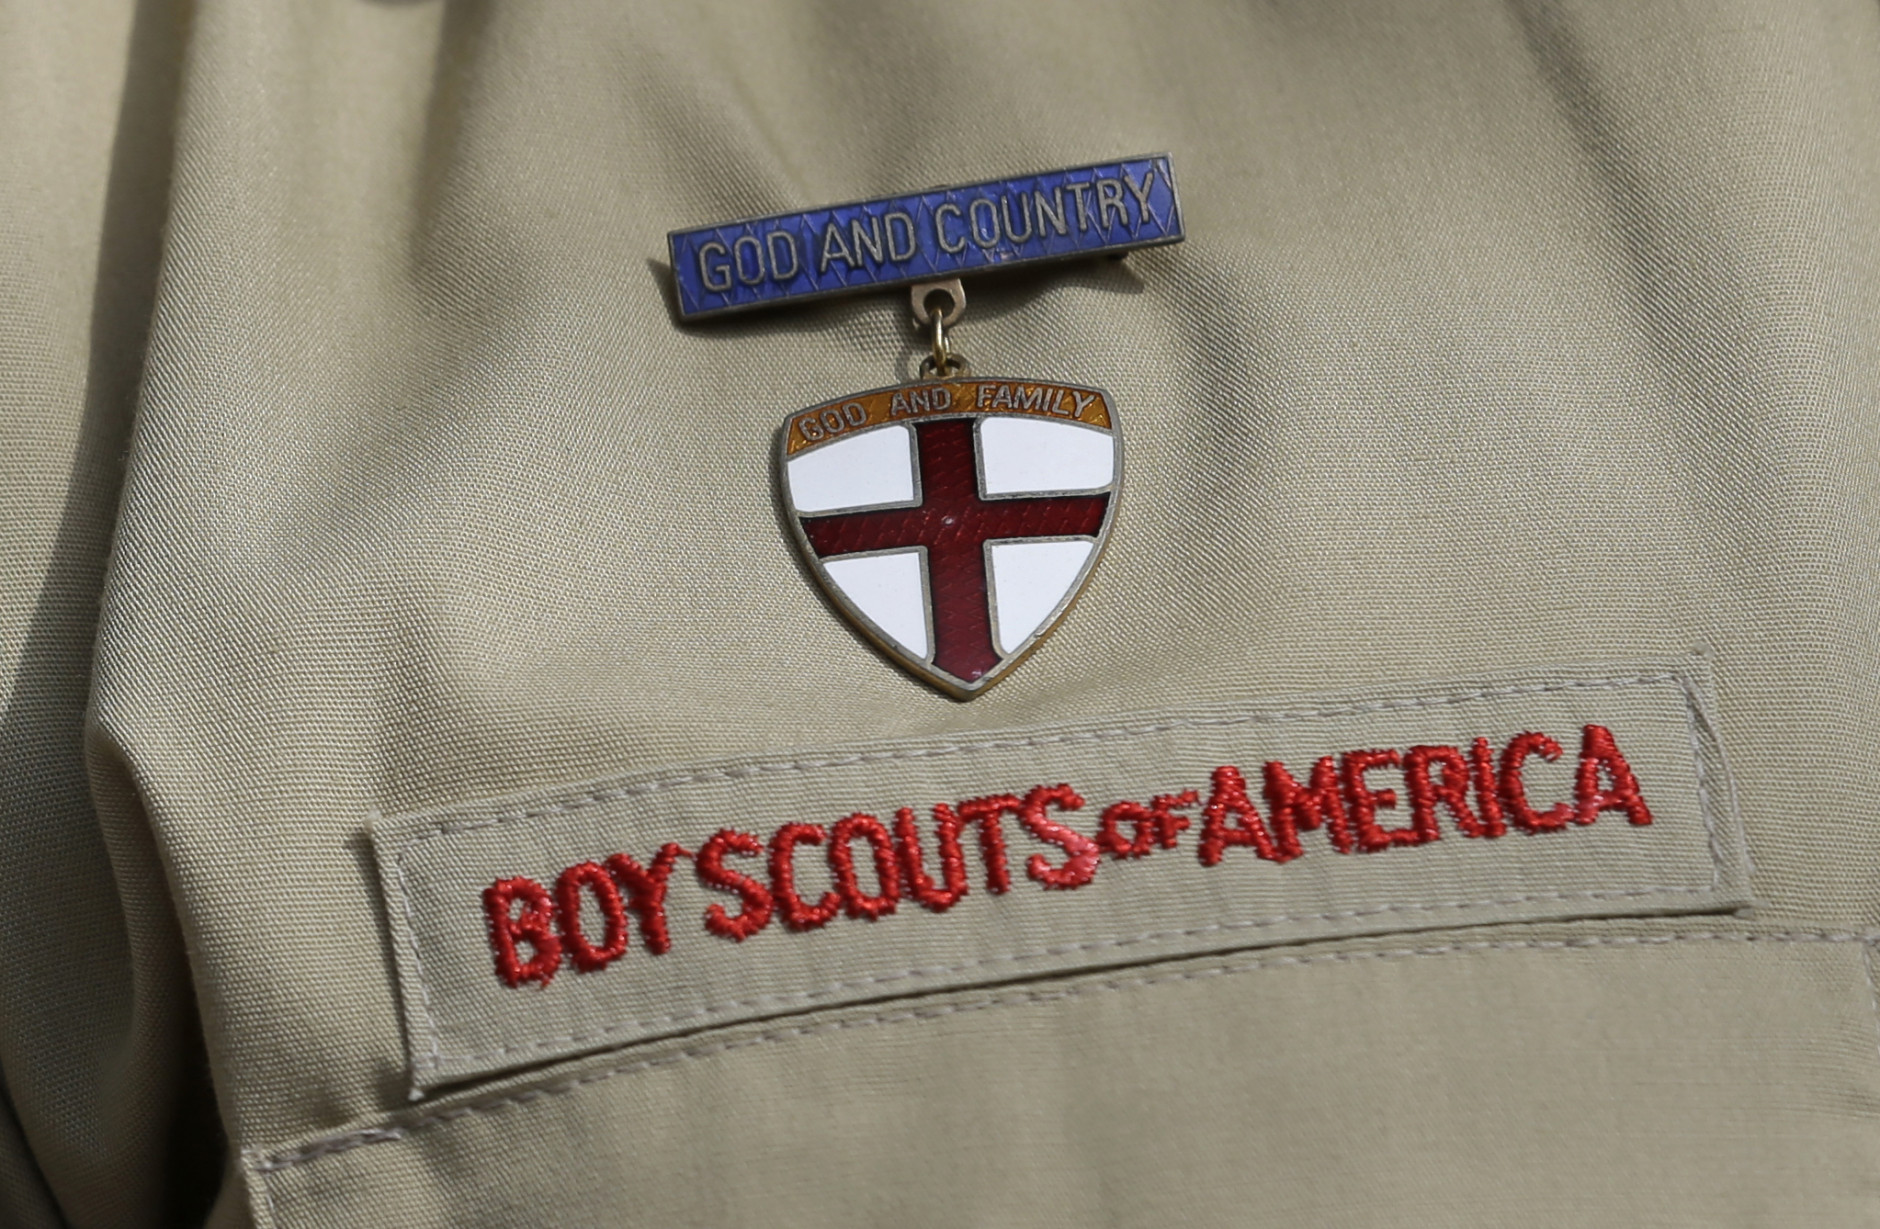 File - In this Feb. 4, 2013 file photo, shows a close up detail of a Boy Scout uniform worn during a news conference in front of the Boy Scouts of America headquarters in Irving, Texas. Attorneys for the Boy Scouts of America have reached a settlement with a former San Antonio Scout who says he was abused by his adult leader. (AP Photo/Tony Gutierrez, File)